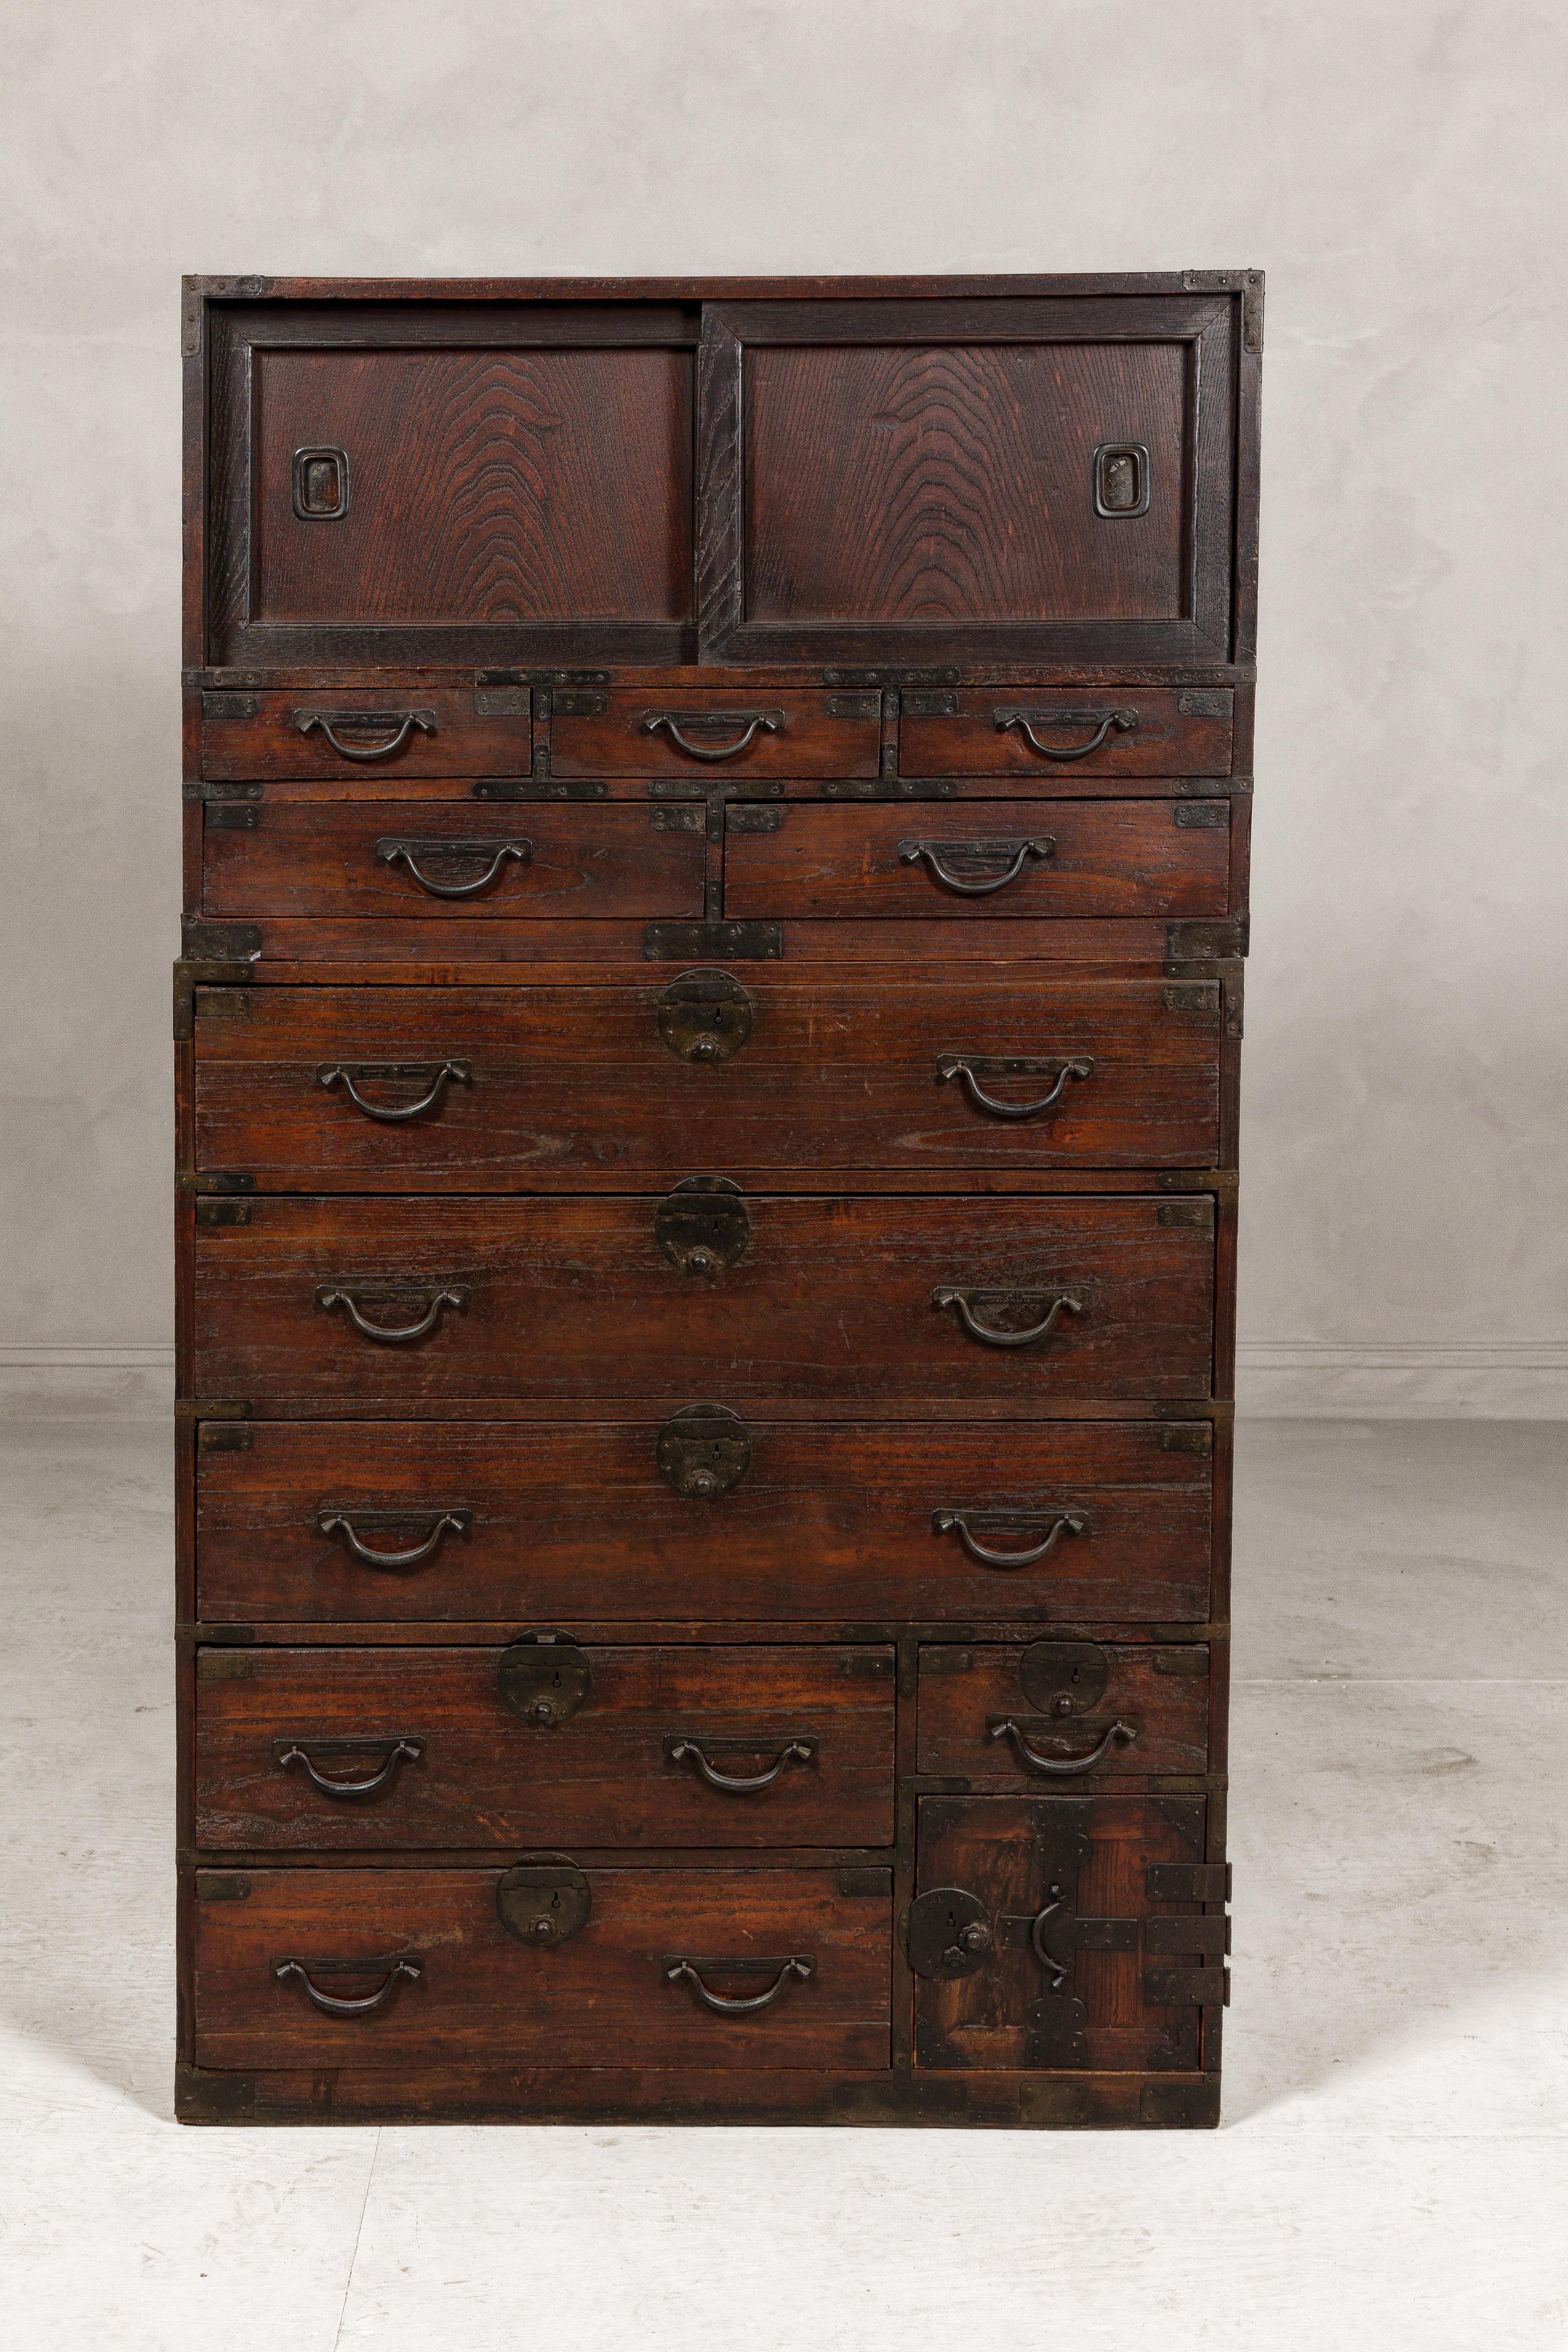 A Japanese antique two-piece Tansu chest cabinet from the 19th century with two sliding doors, 11 drawers and safe section. This 19th-century Japanese antique Tansu chest cabinet is a remarkable piece of history and craftsmanship, blending